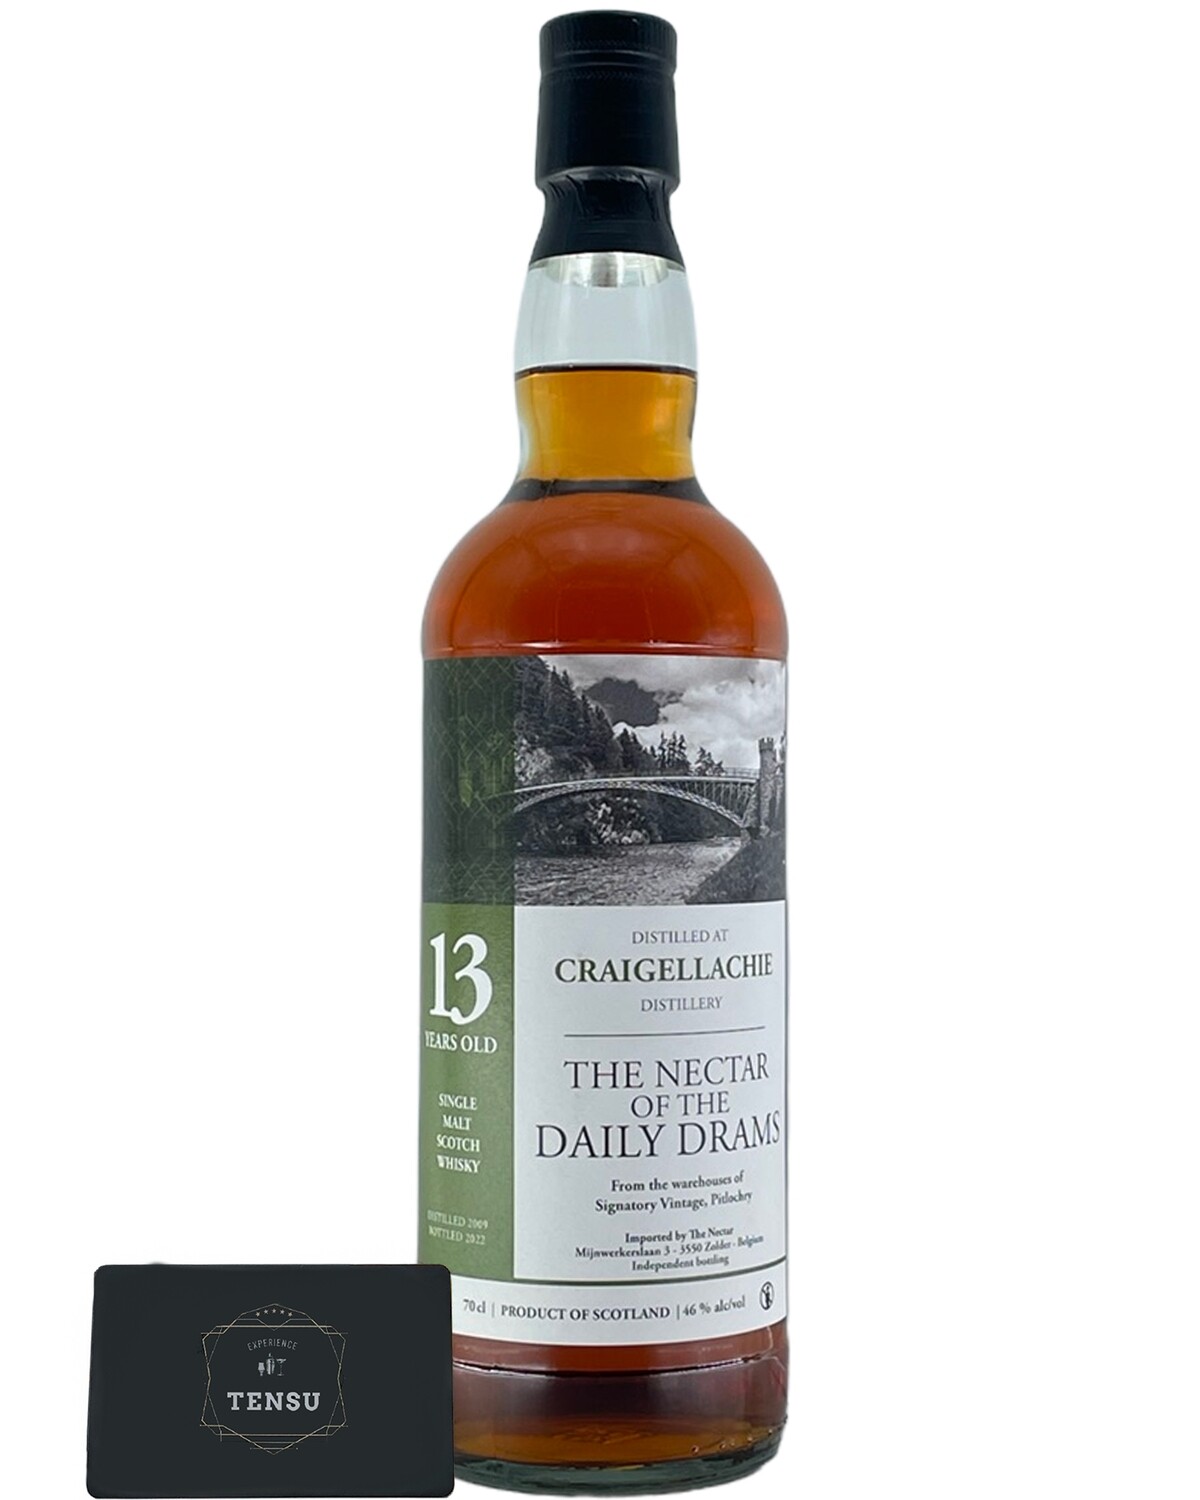 Craigellachie 13 Years Old (2009-2022) 46.0 Daily Drams "The Nectar"